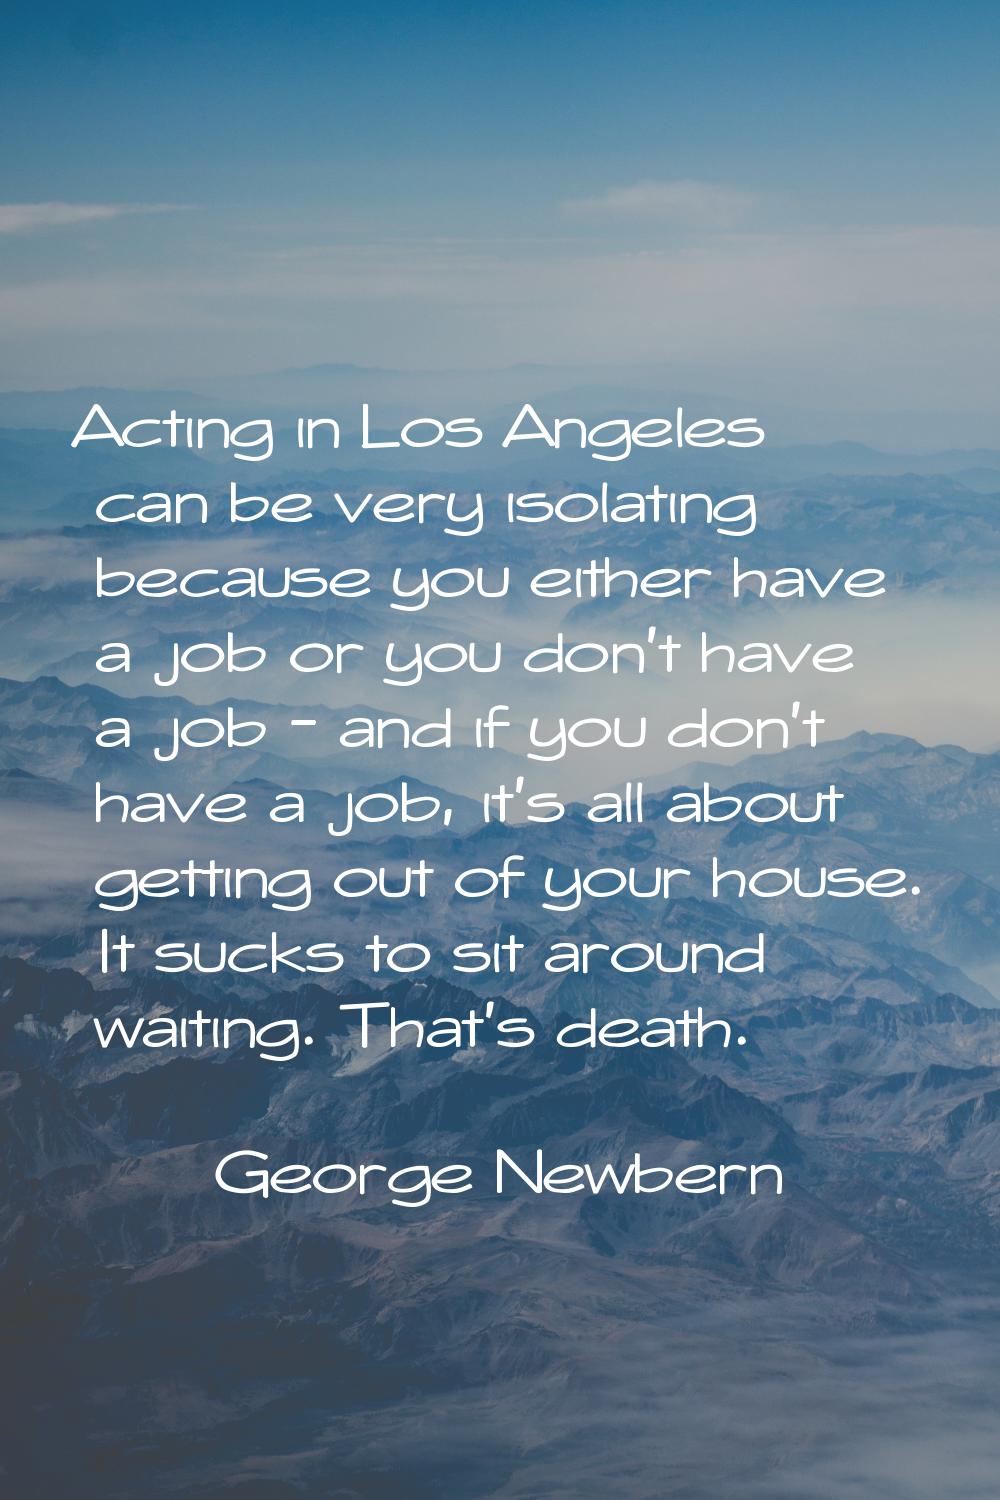 Acting in Los Angeles can be very isolating because you either have a job or you don't have a job -